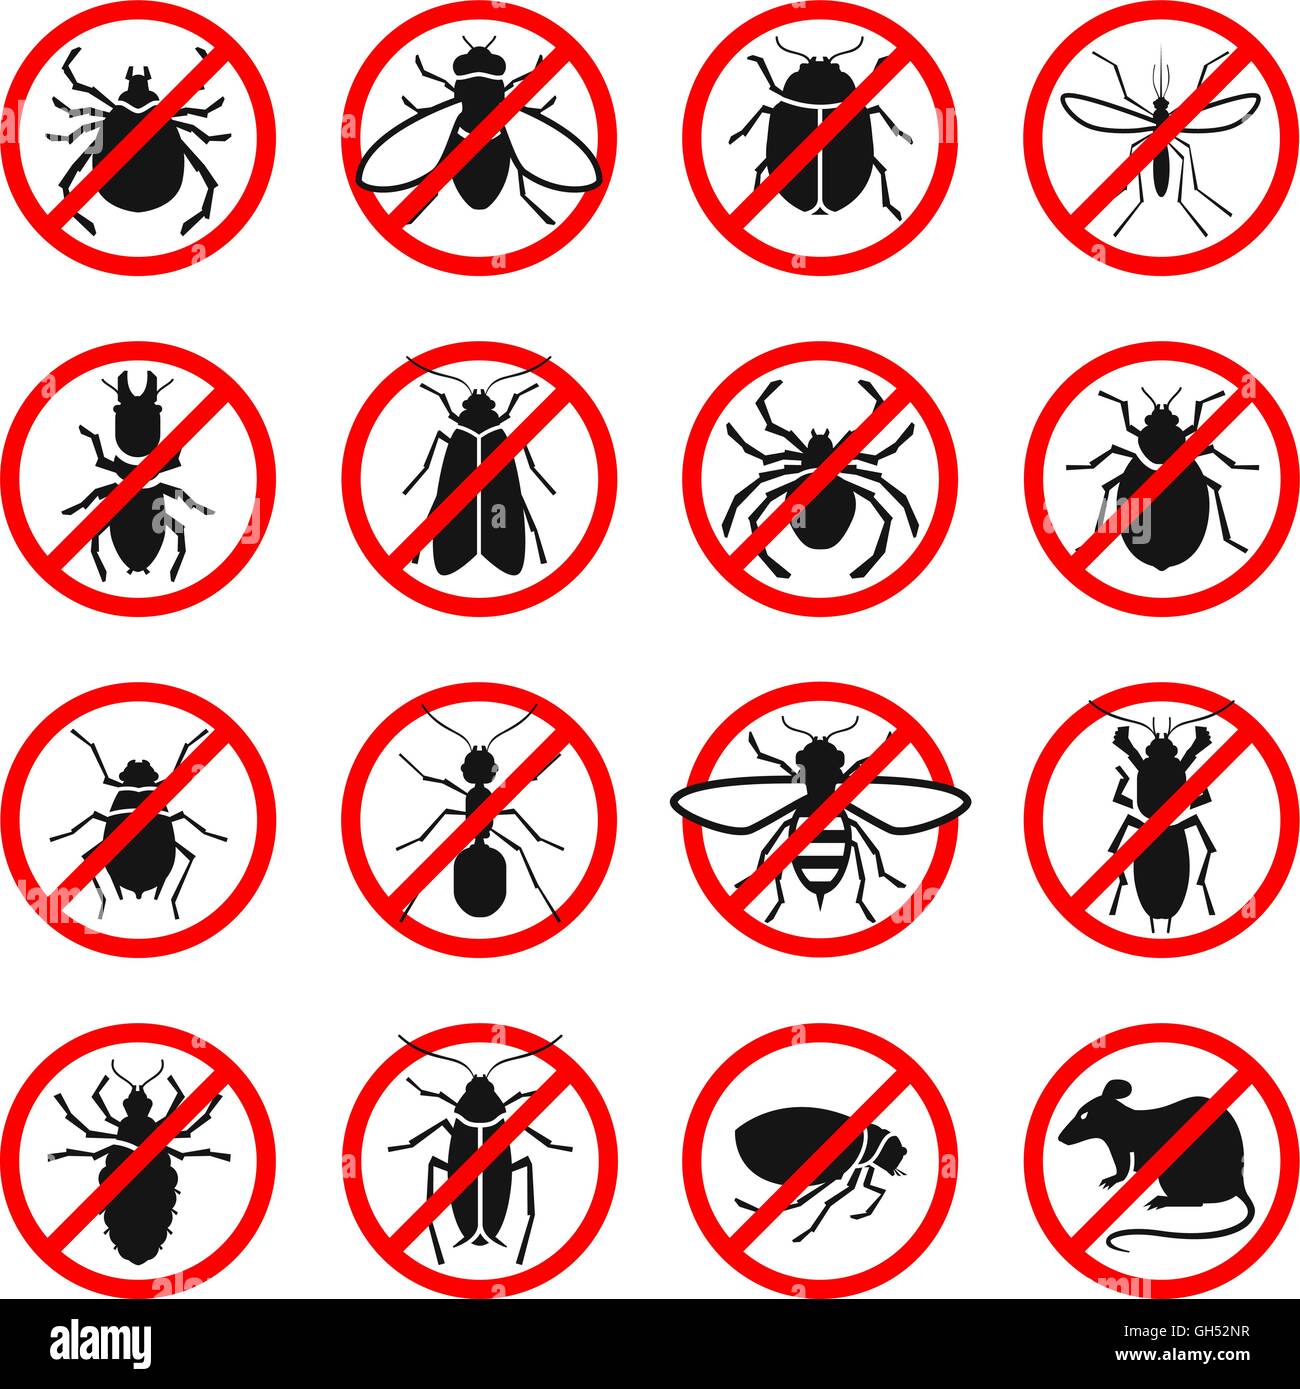 Pest control. Harmful insects and rodents set icons. Vector illustration Stock Vector